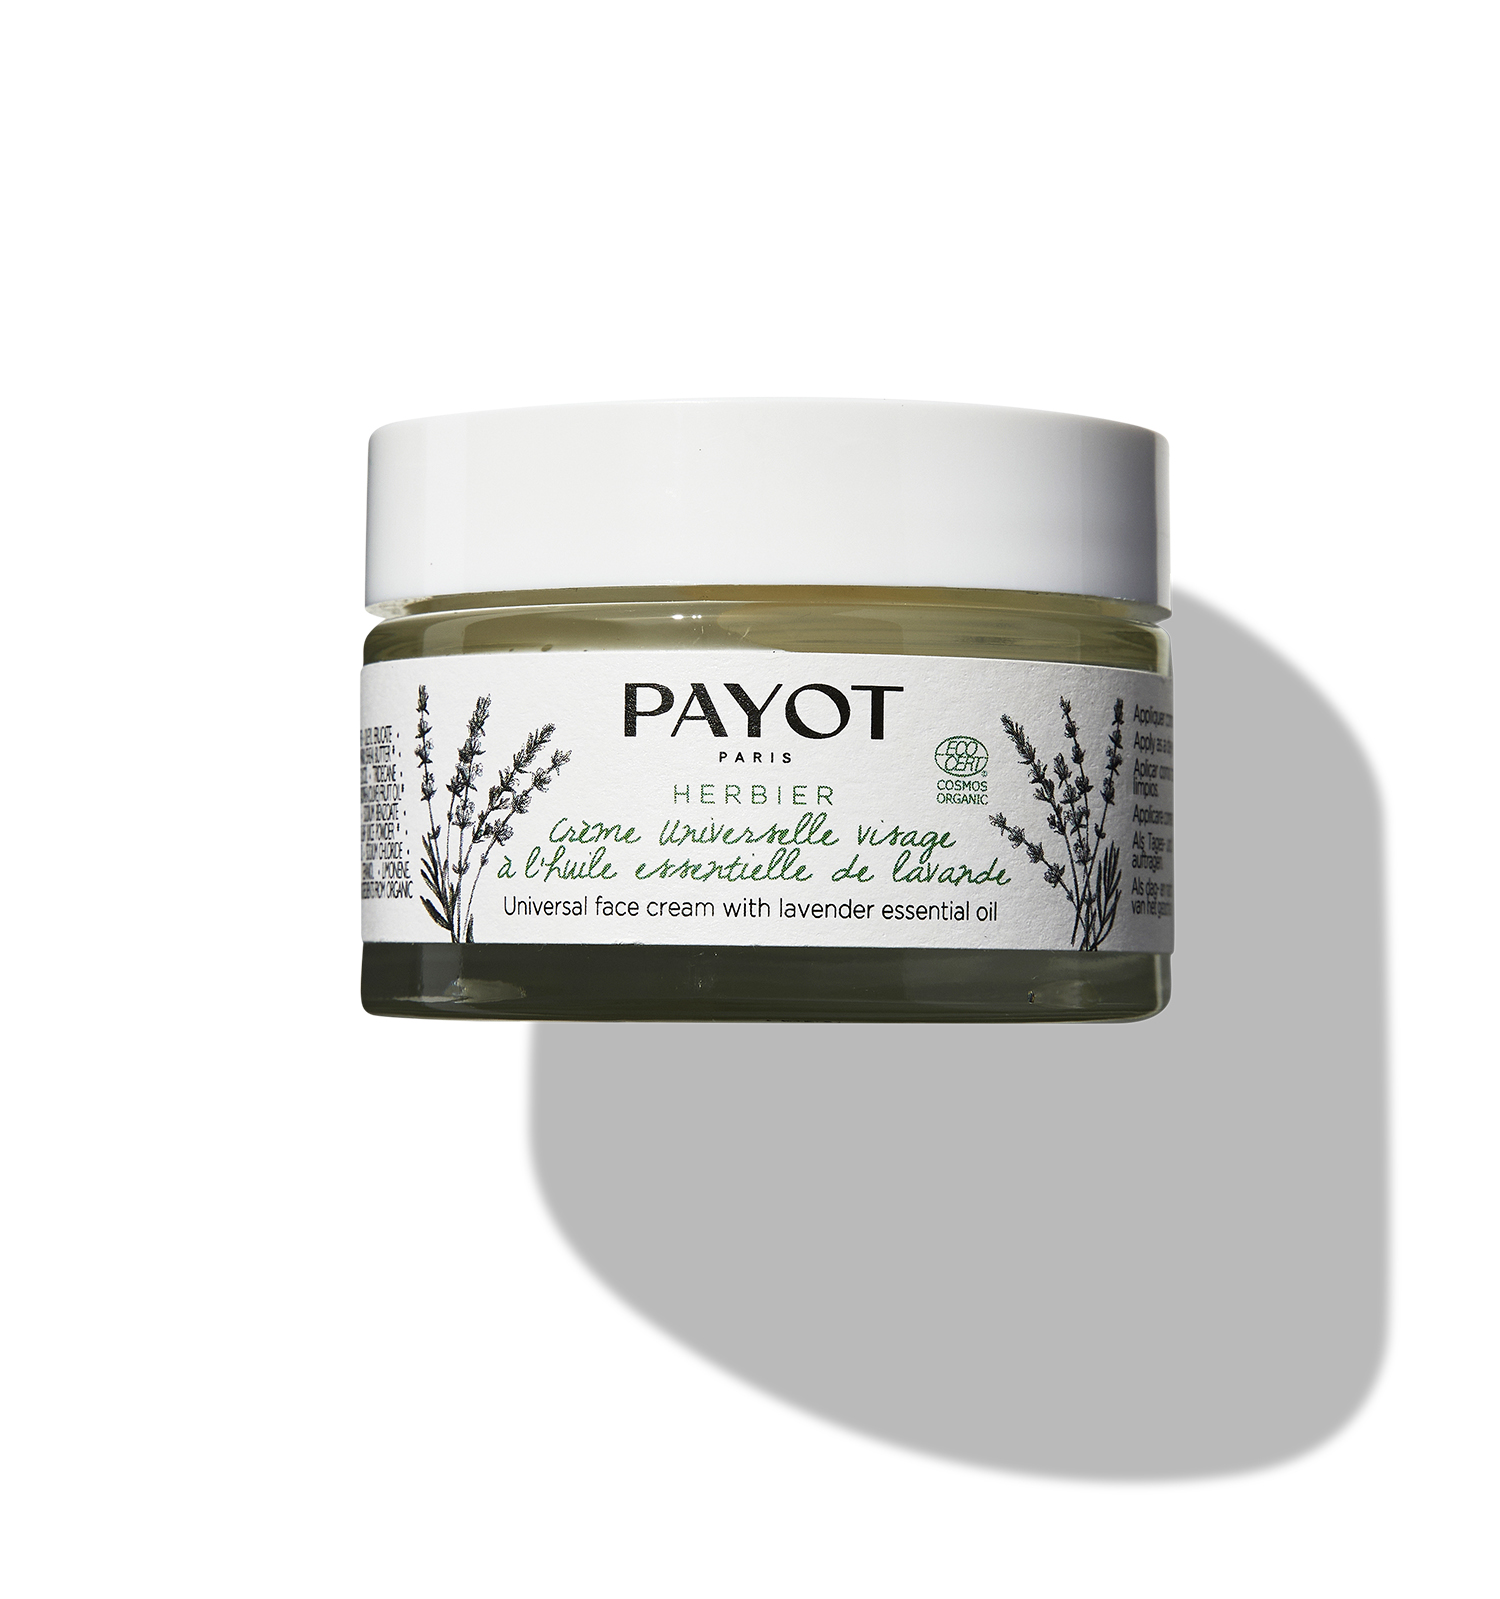 Payot Herbier Universal face Cream